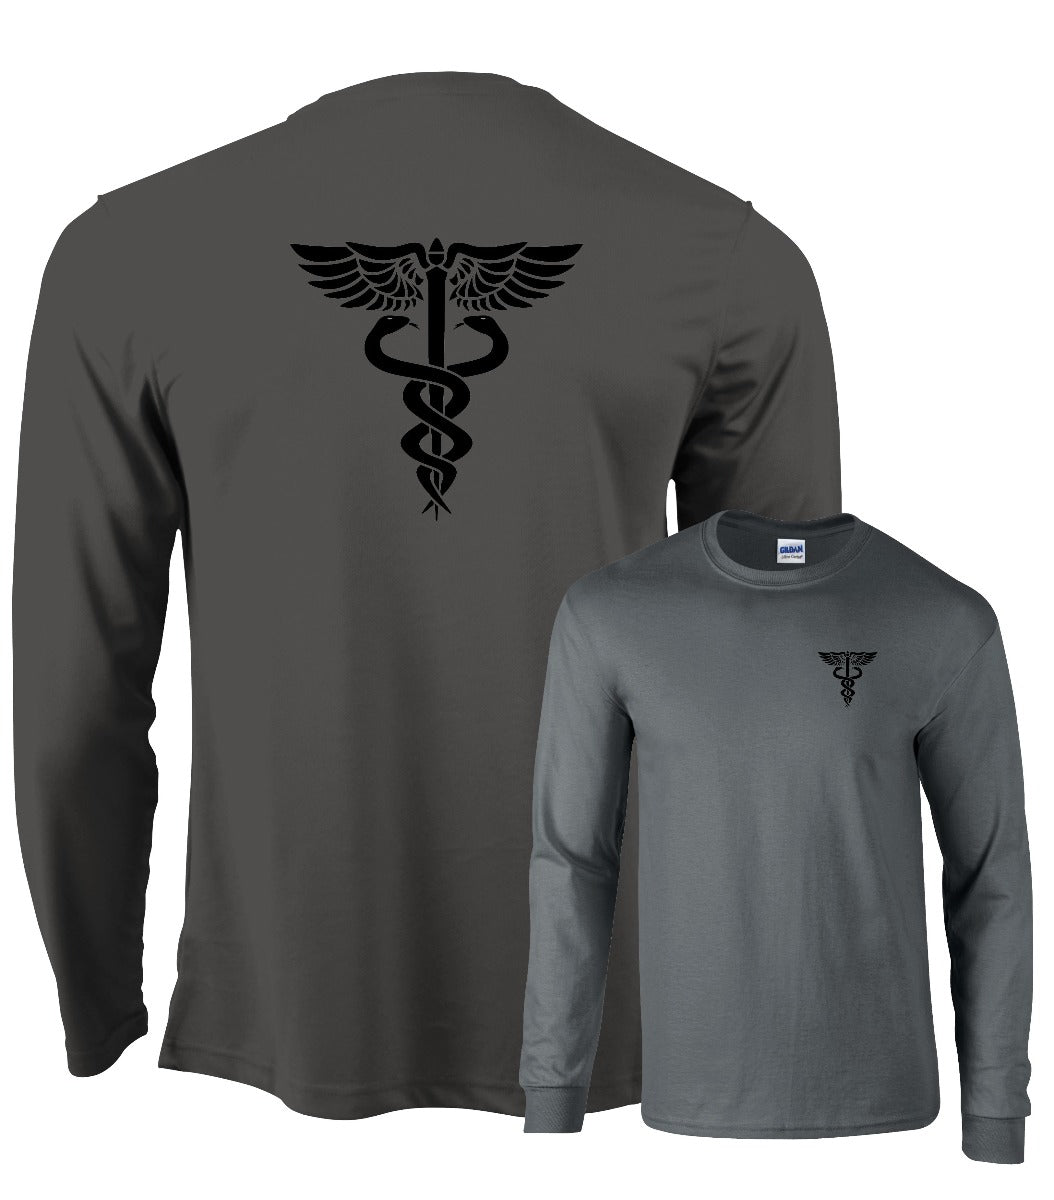 Double Printed Paramedic Long sleeve Wicking T-Shirt